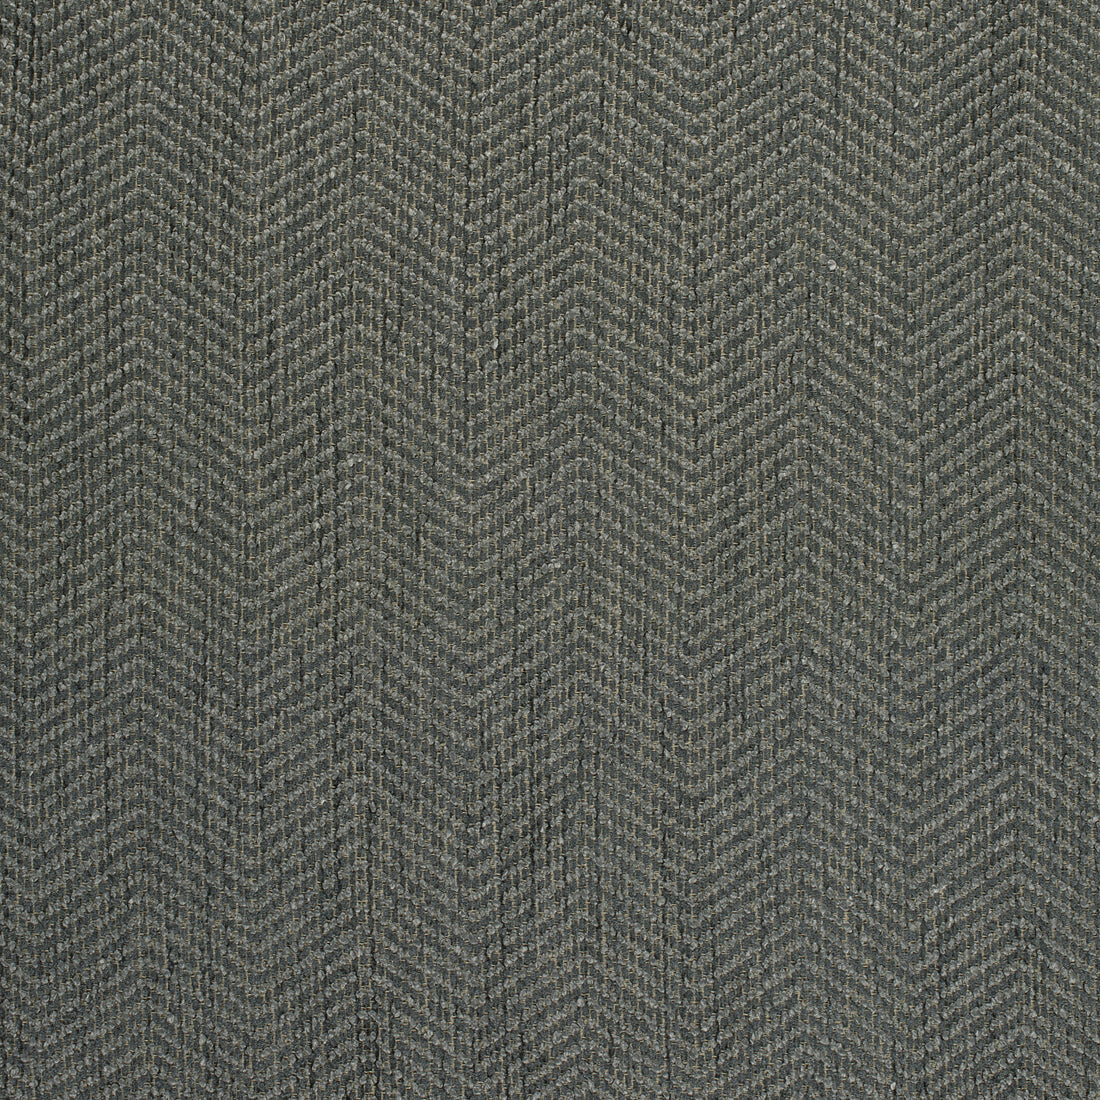 Dalton Herringbone fabric in dark grey color - pattern number W80625 - by Thibaut in the Pinnacle collection